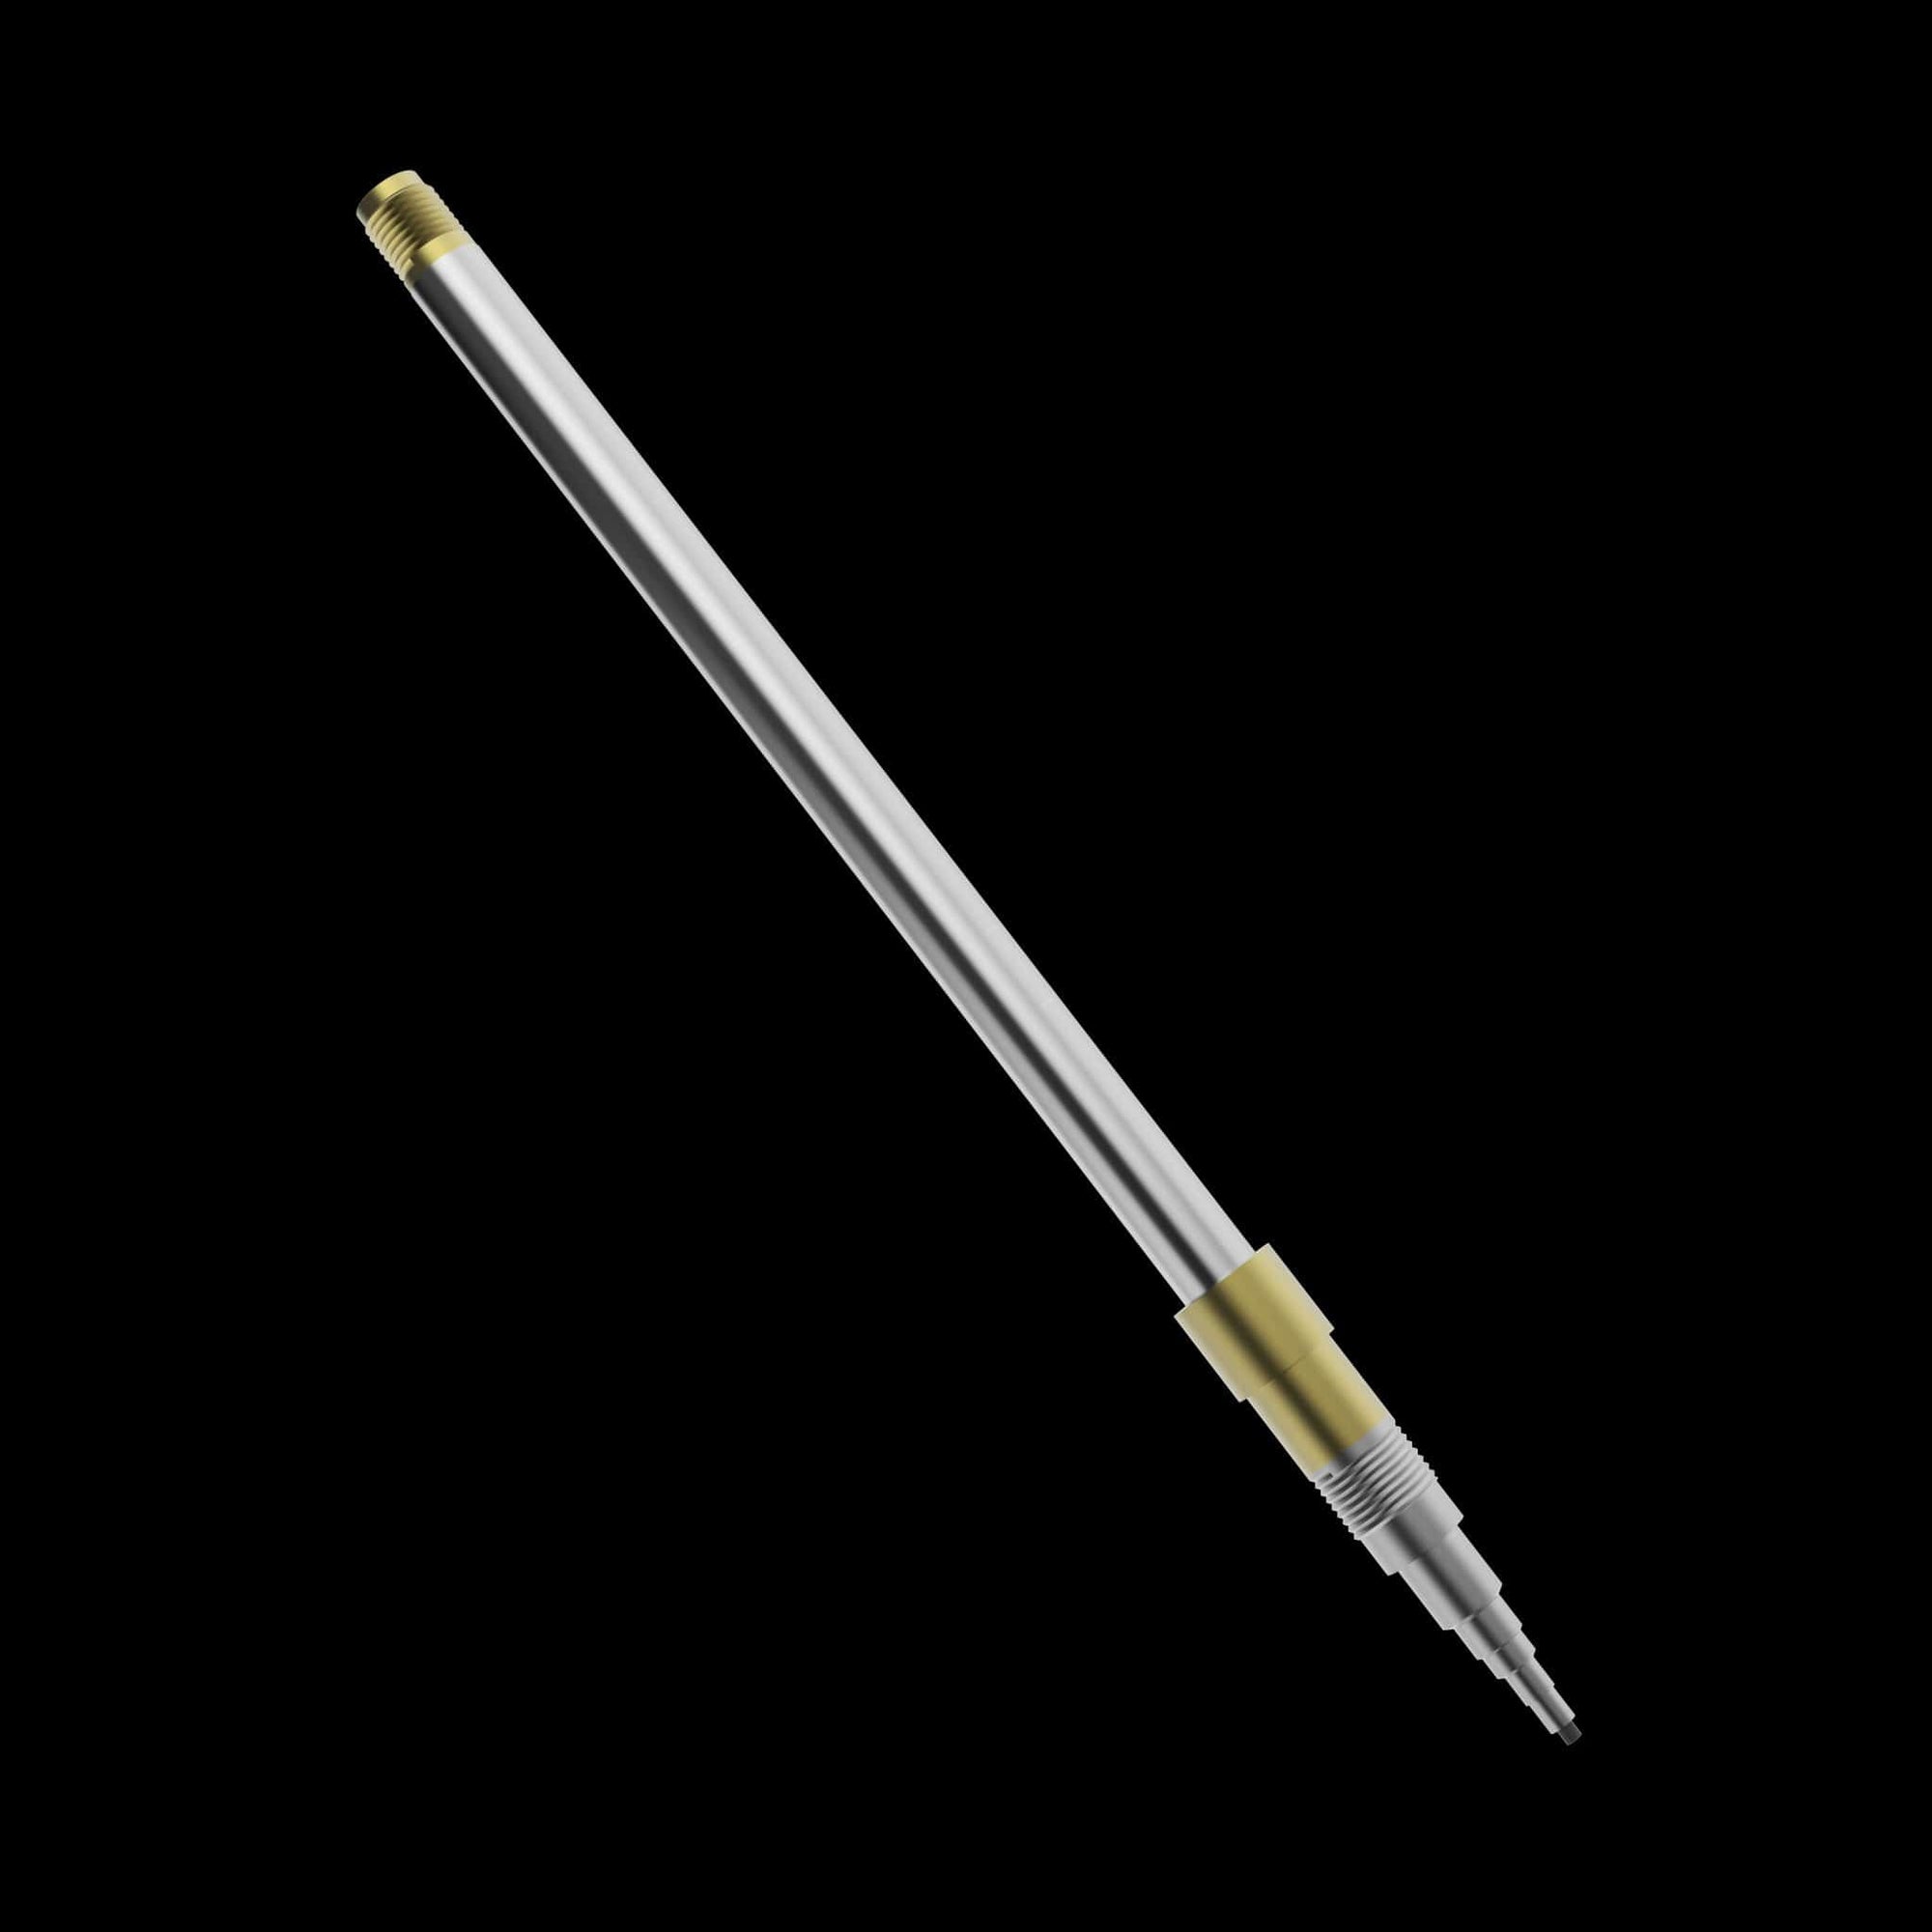 Stainless Steel pencil